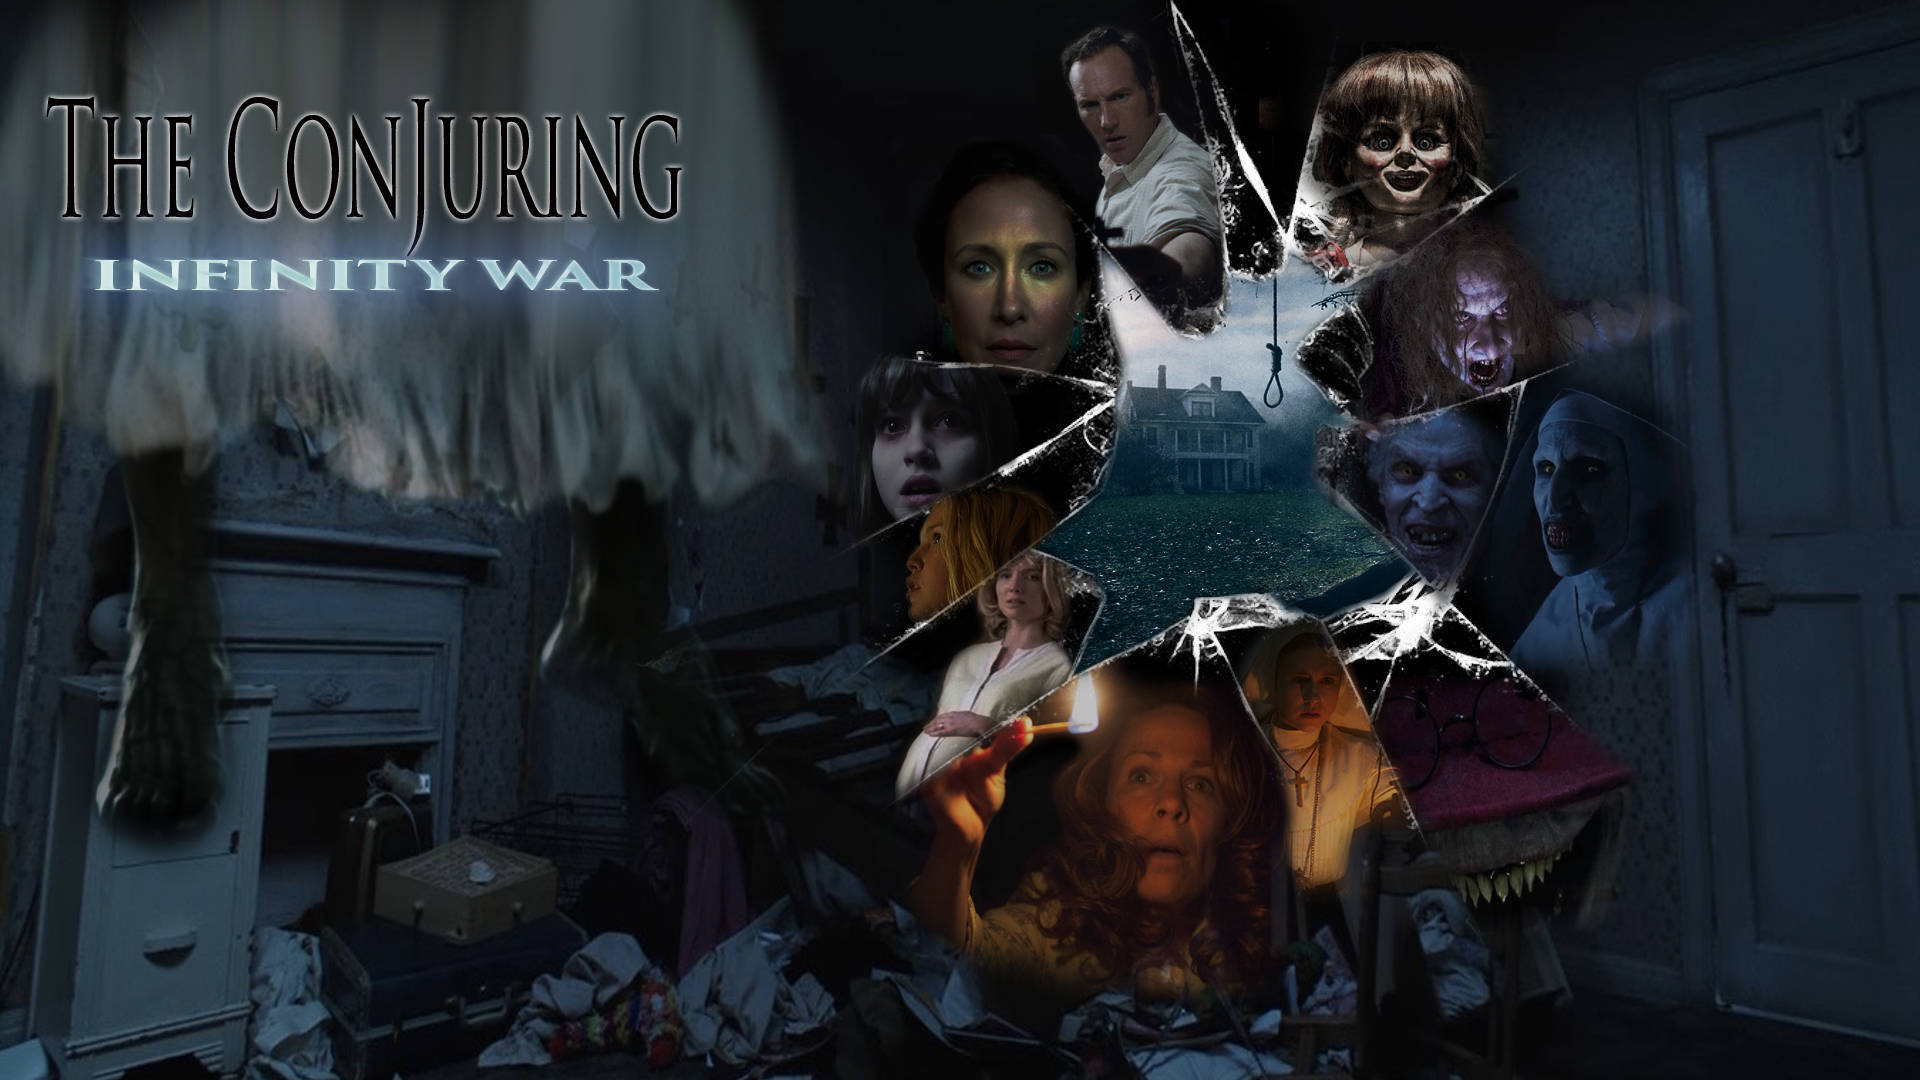 The Conjuring Infinity War Background